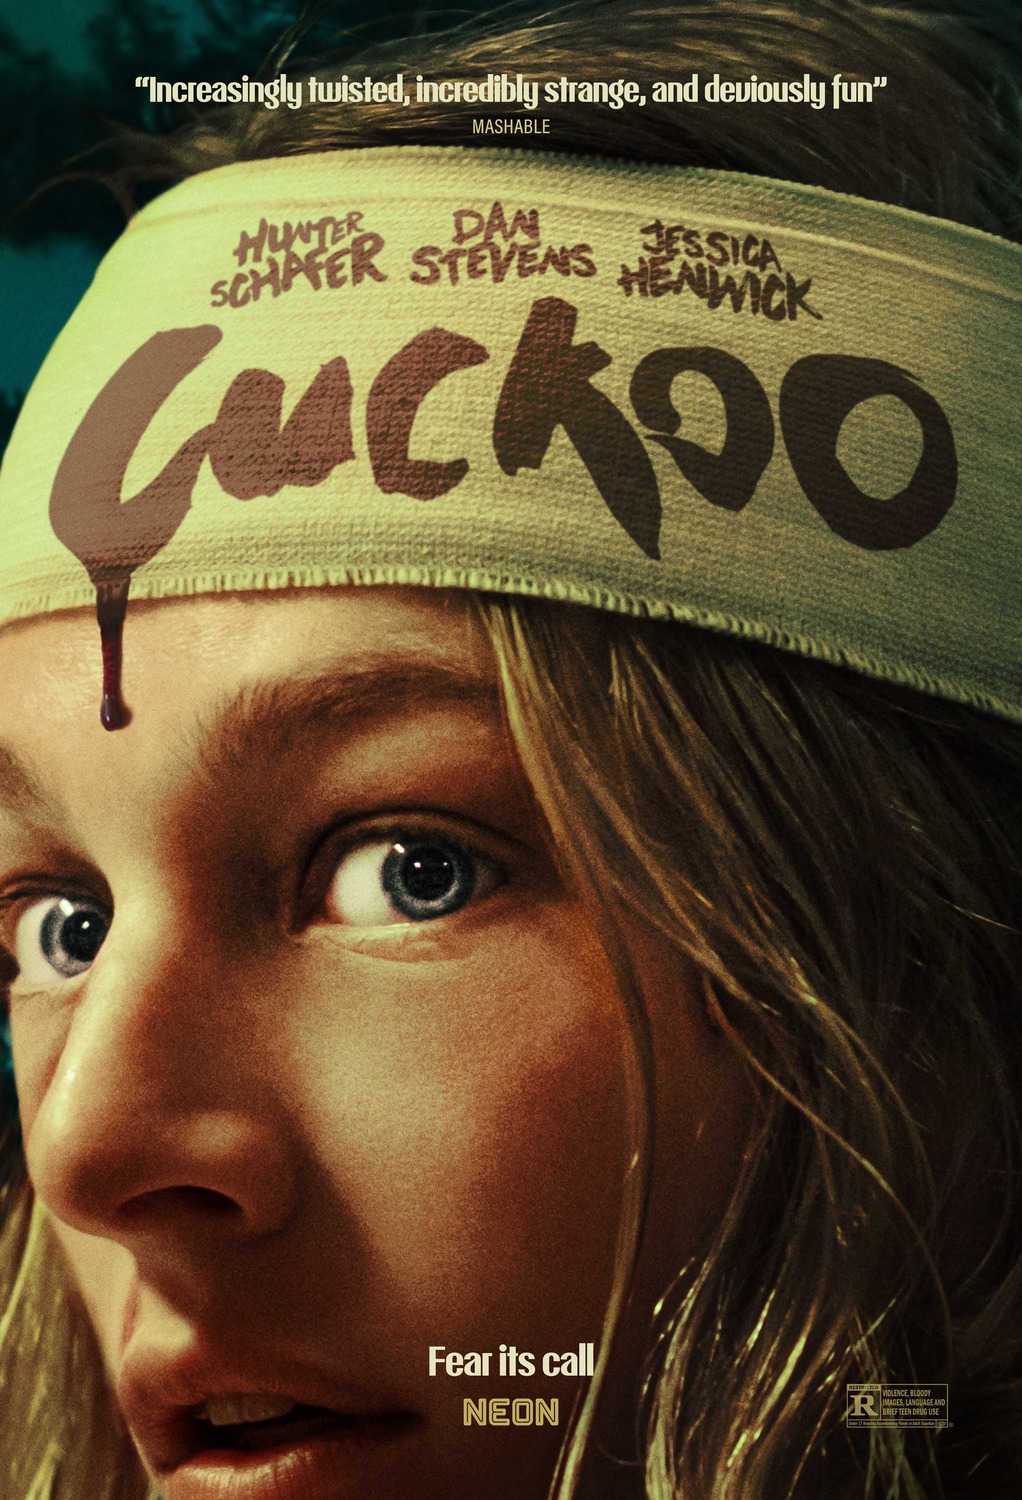 Extra Large Movie Poster Image for Cuckoo 